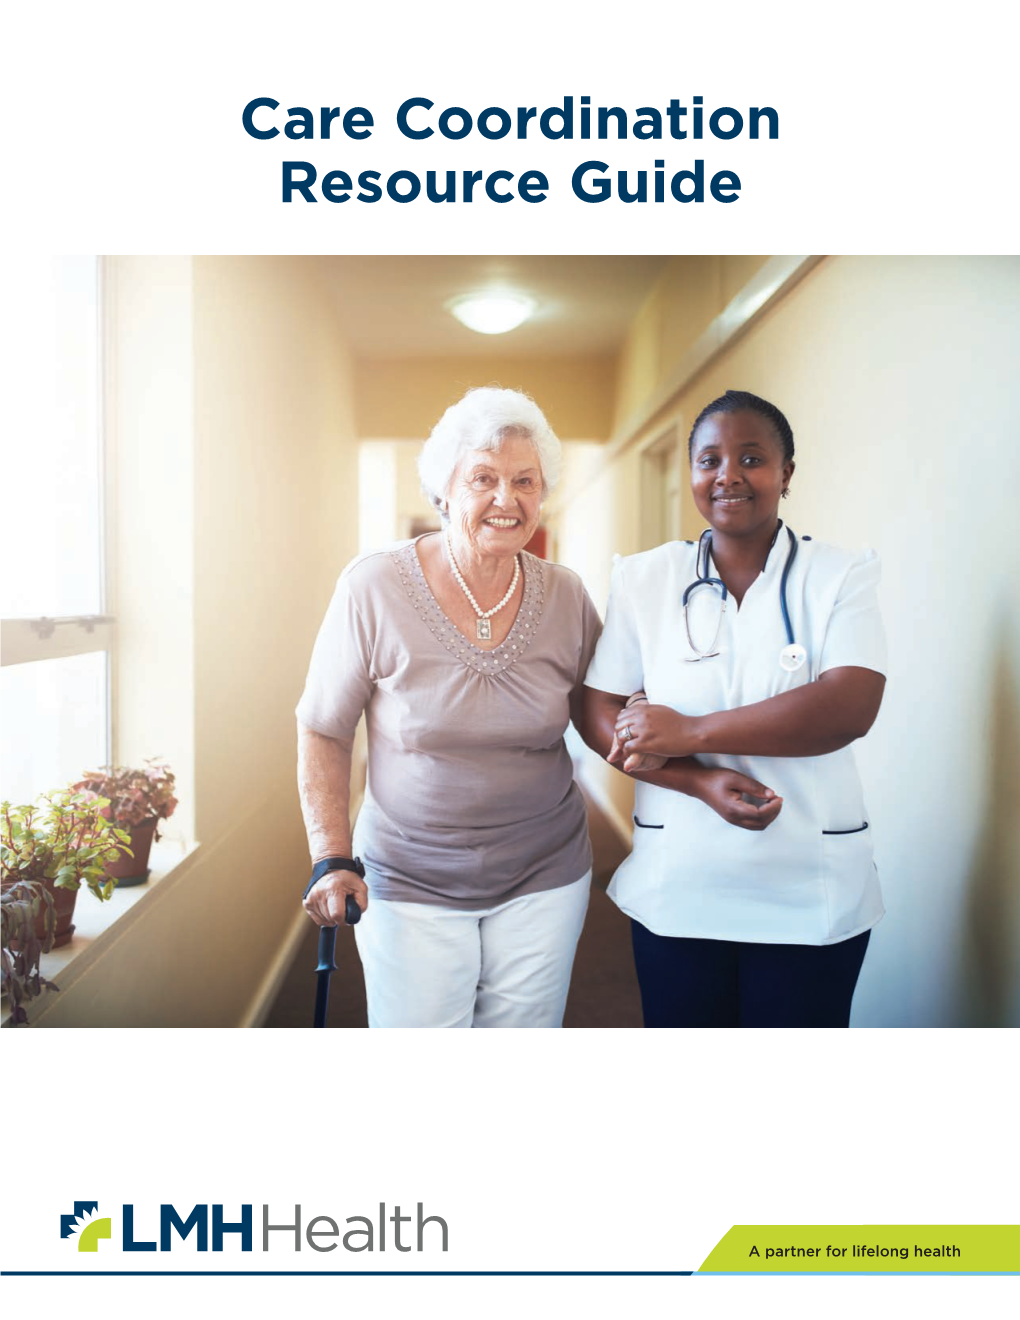 Care Coordination Resource Guide